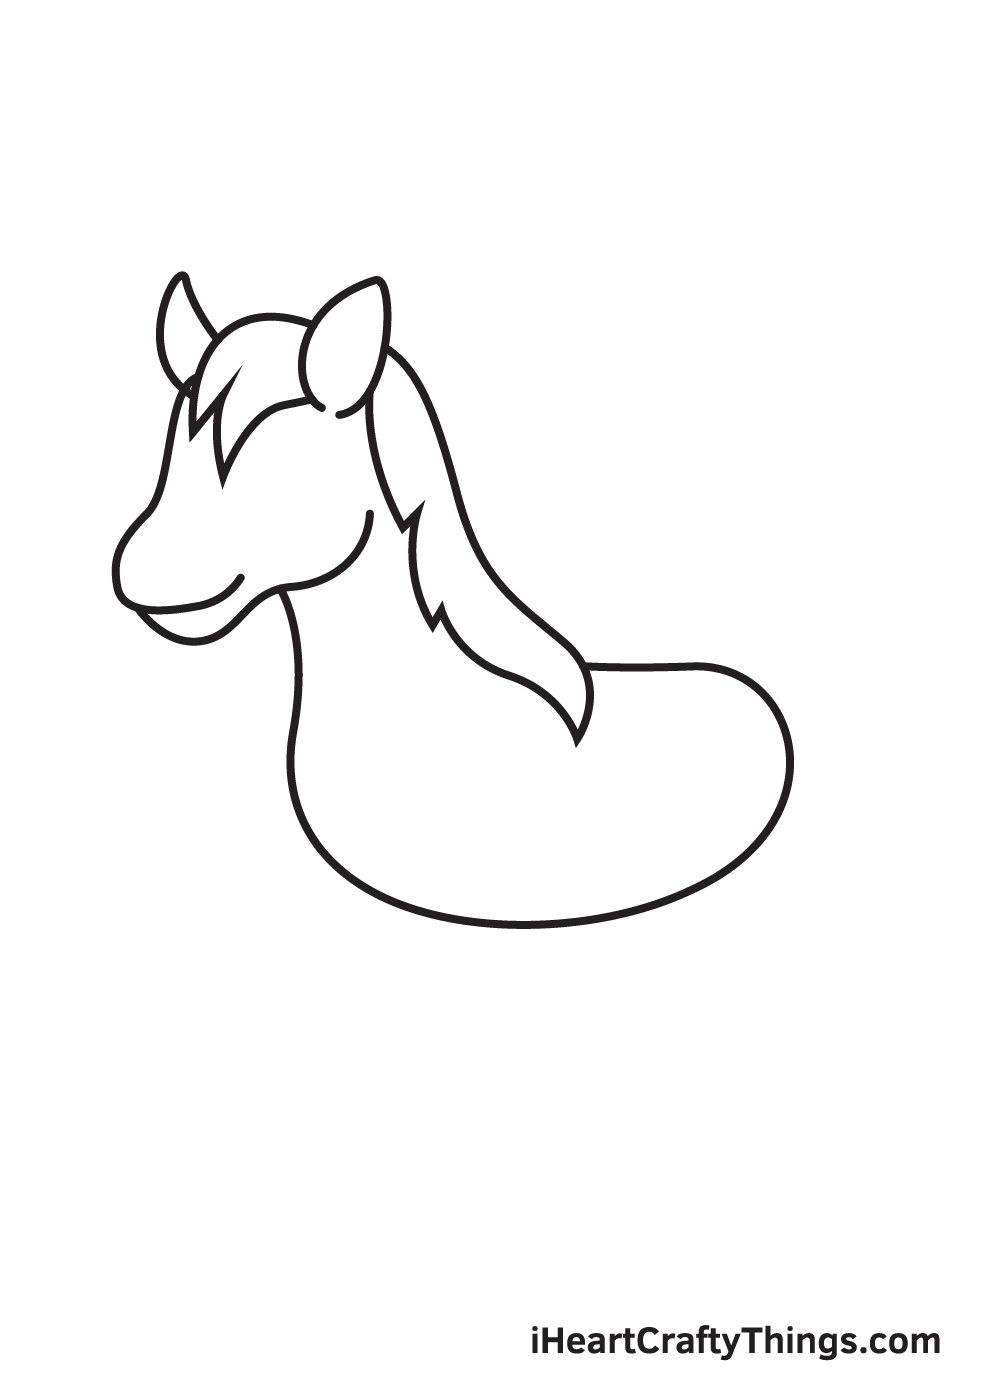 horse drawing - step 4